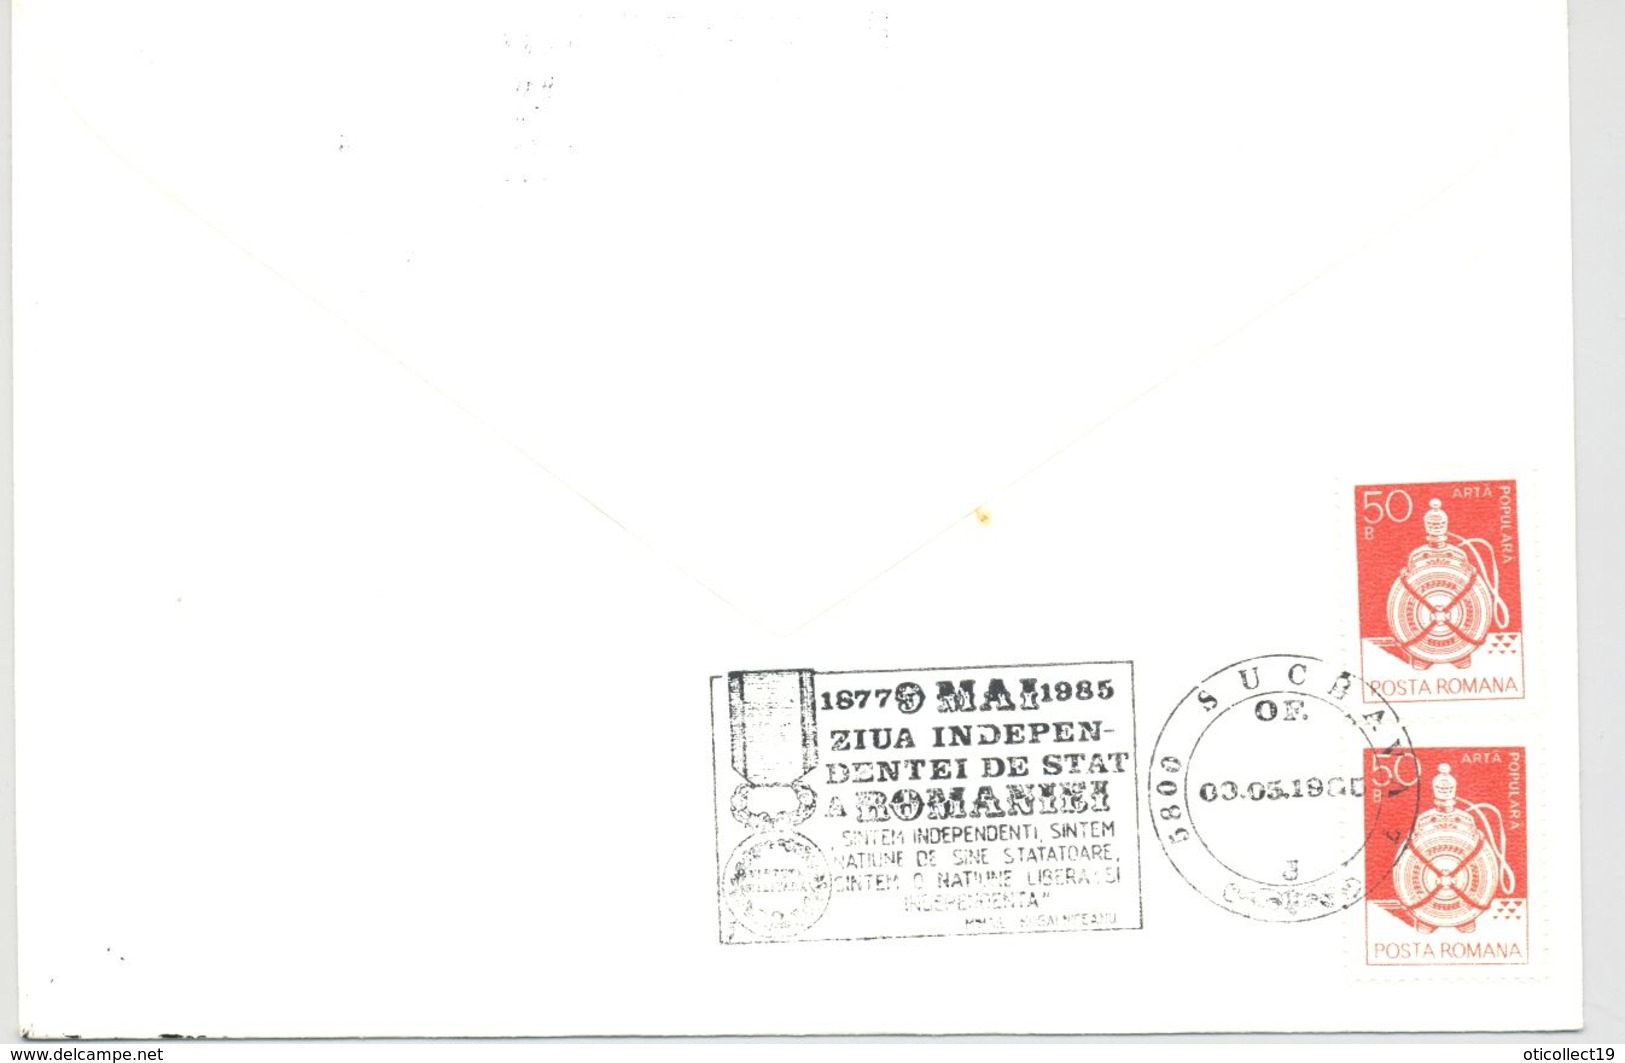 ROMANIAN STATE INDEPENDENCE ANNIVERSARY, SPECIAL POSTMARK ON COVER, POTTERY STAMP, 1985, ROMANIA - Lettres & Documents